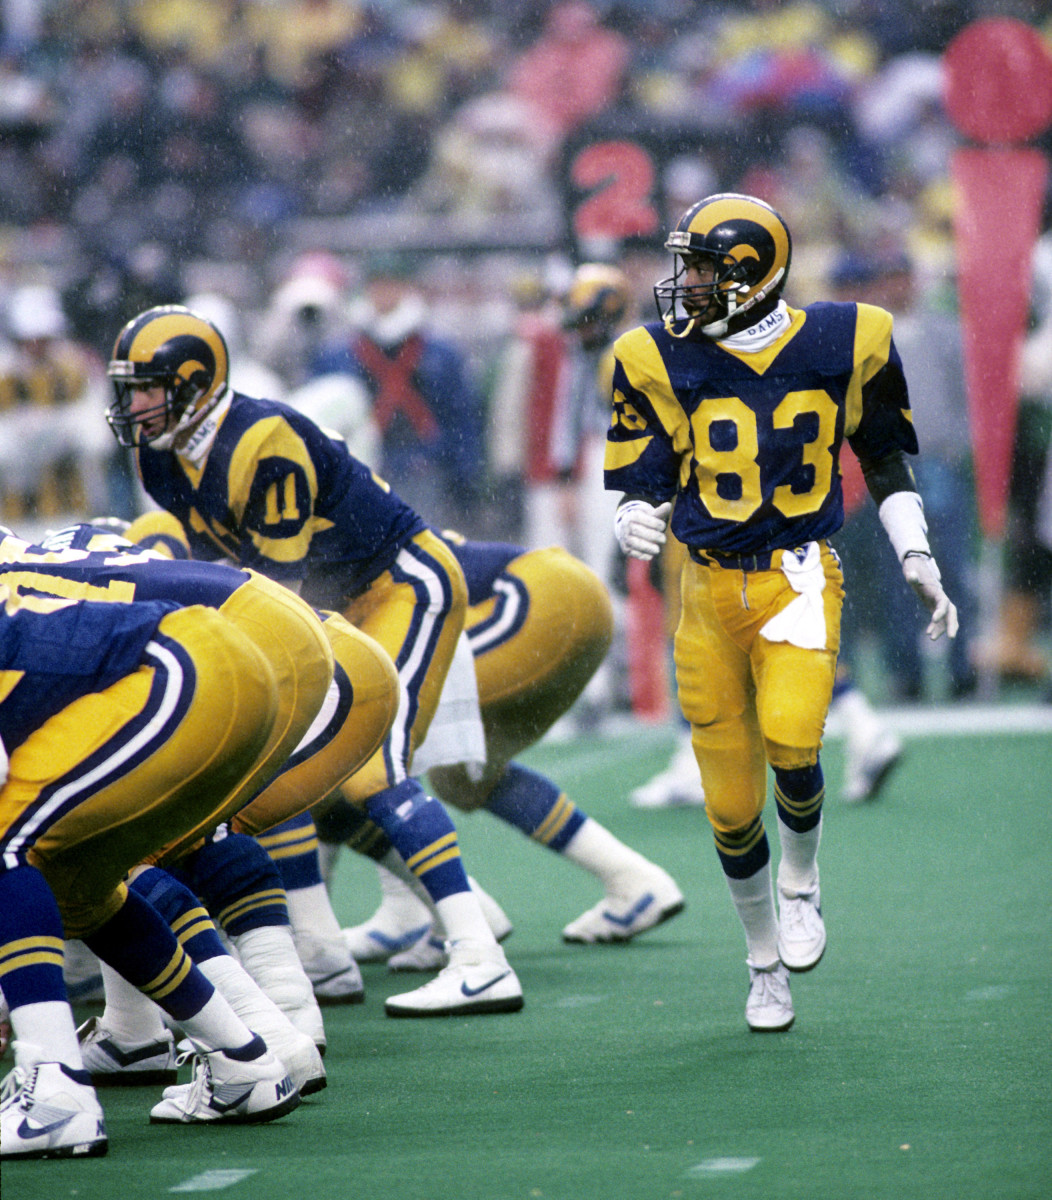 Flipper Anderson goes into motion behind Jim Everett